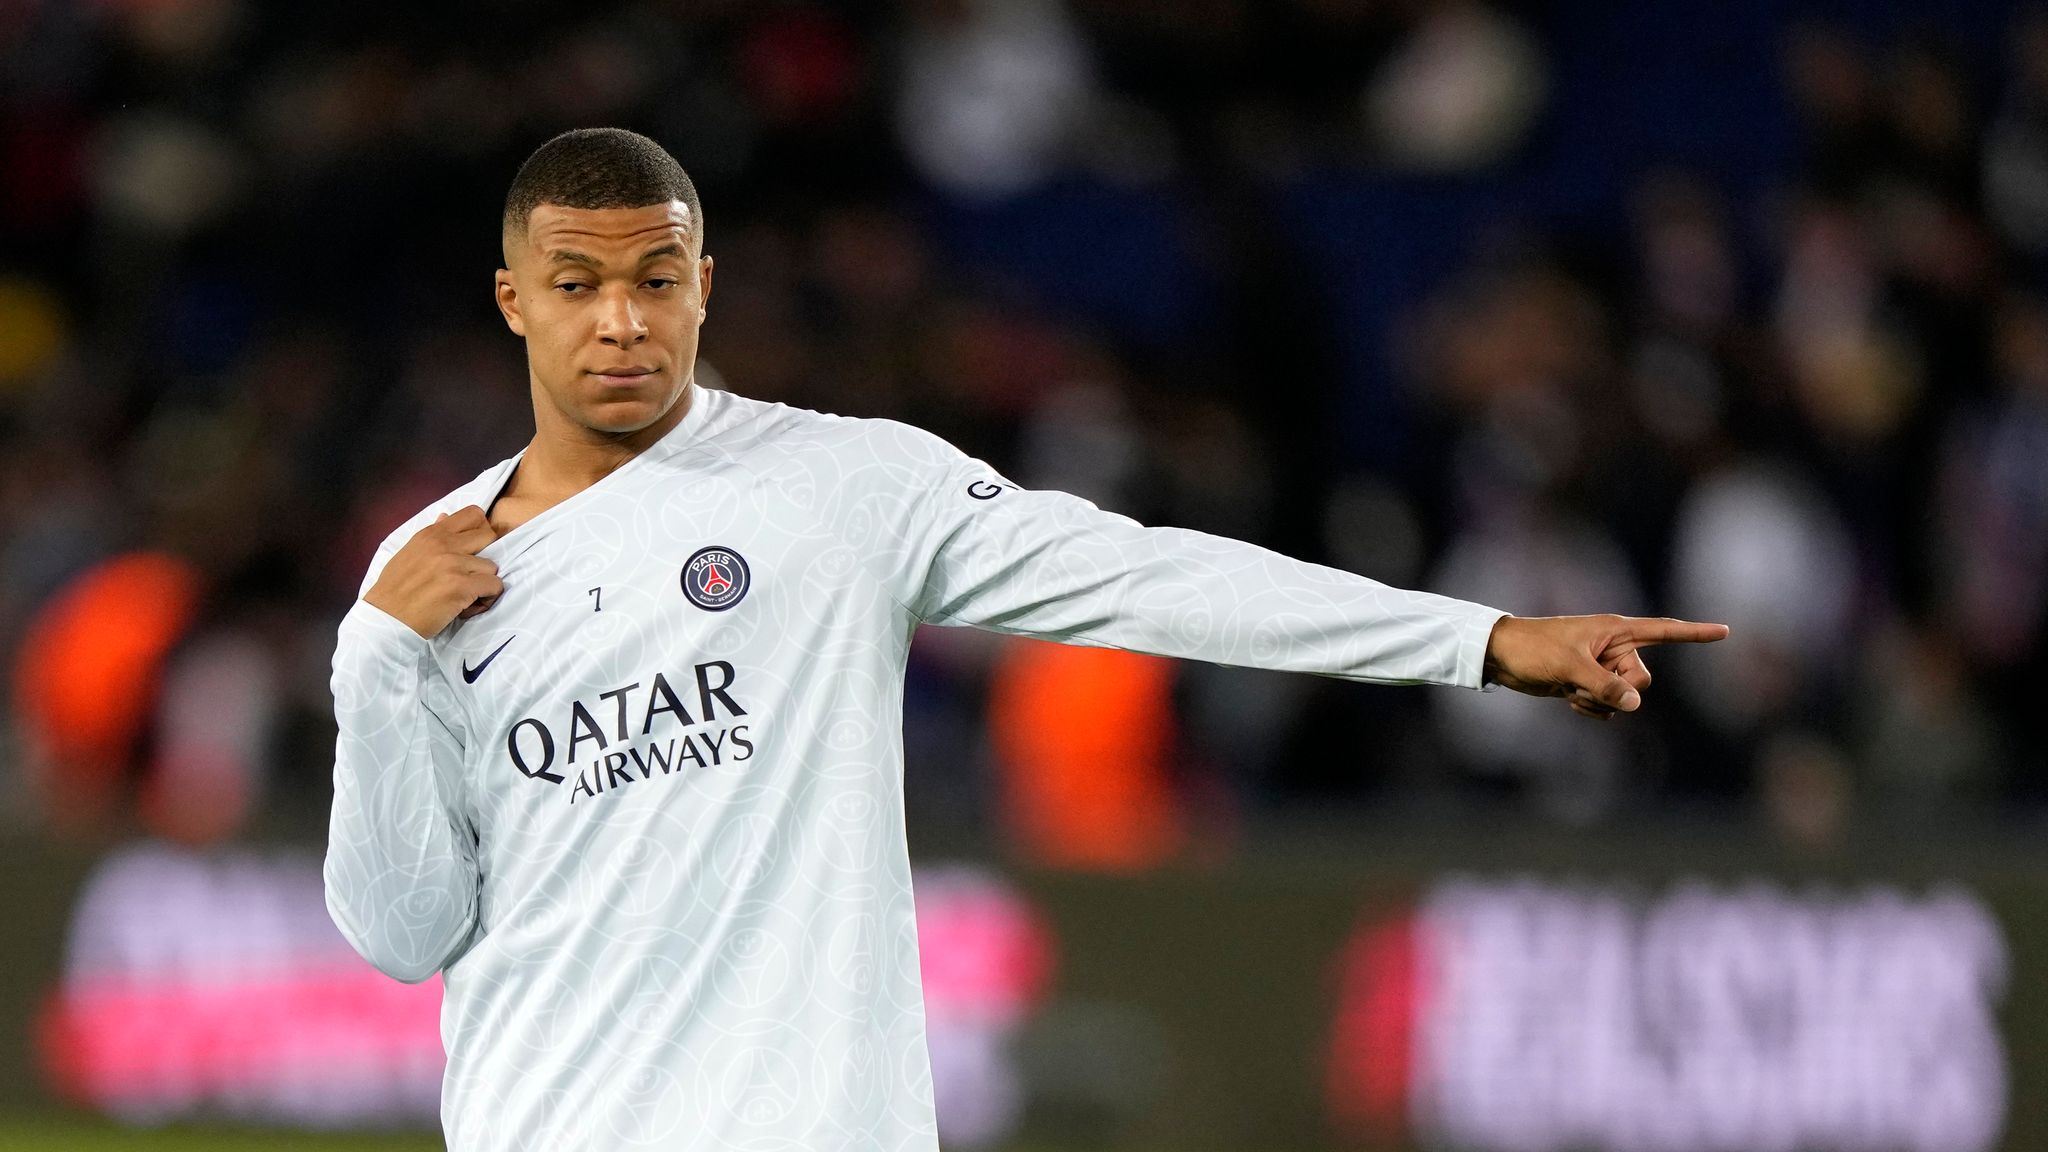 Kylian Mbappé unhappy with PSG for promo video to fans